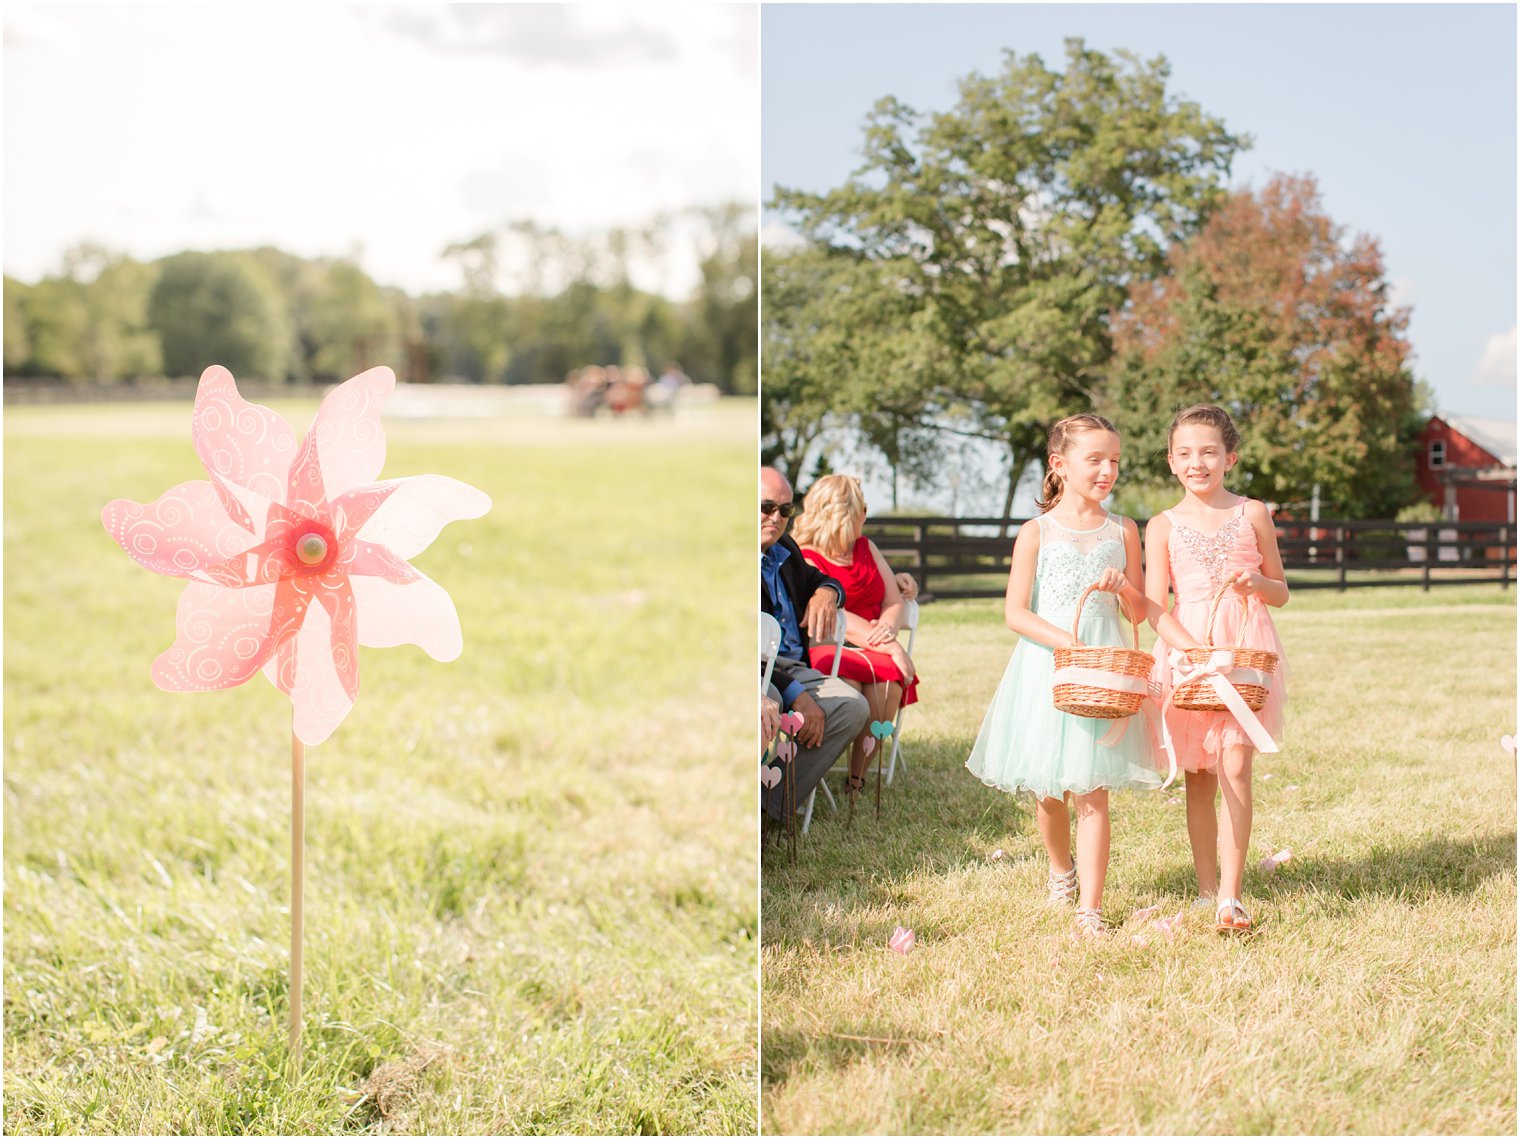 Flower girl dress ideas in peach and mint